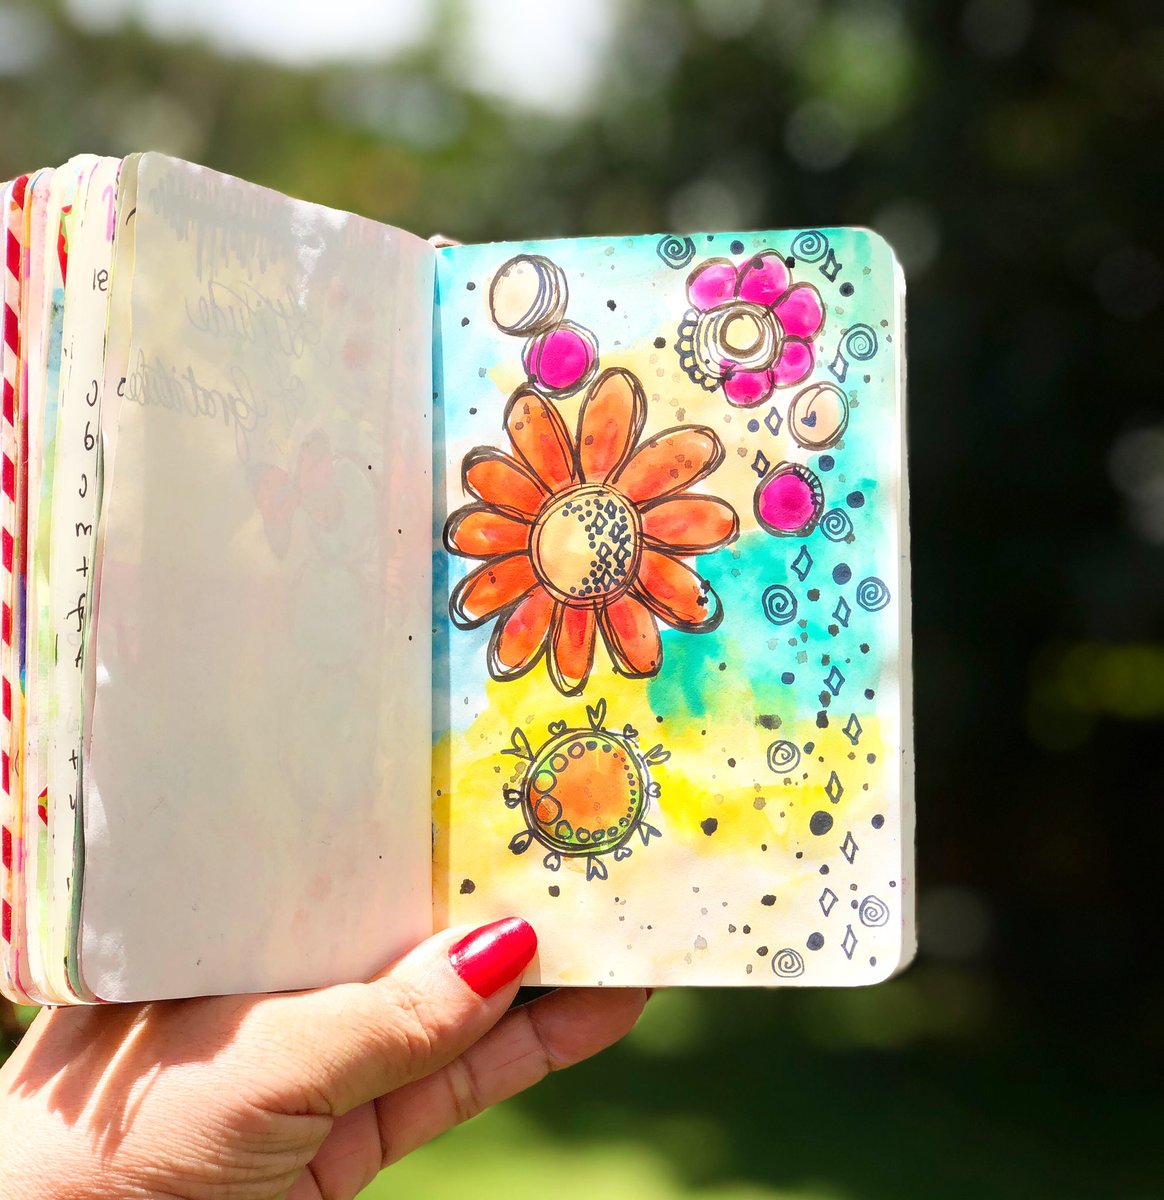 I love art journaling. For every one page that I write my thoughts on, I use the other to put a bright doodle or abstract work. It brings me happiness.  @moleskine 